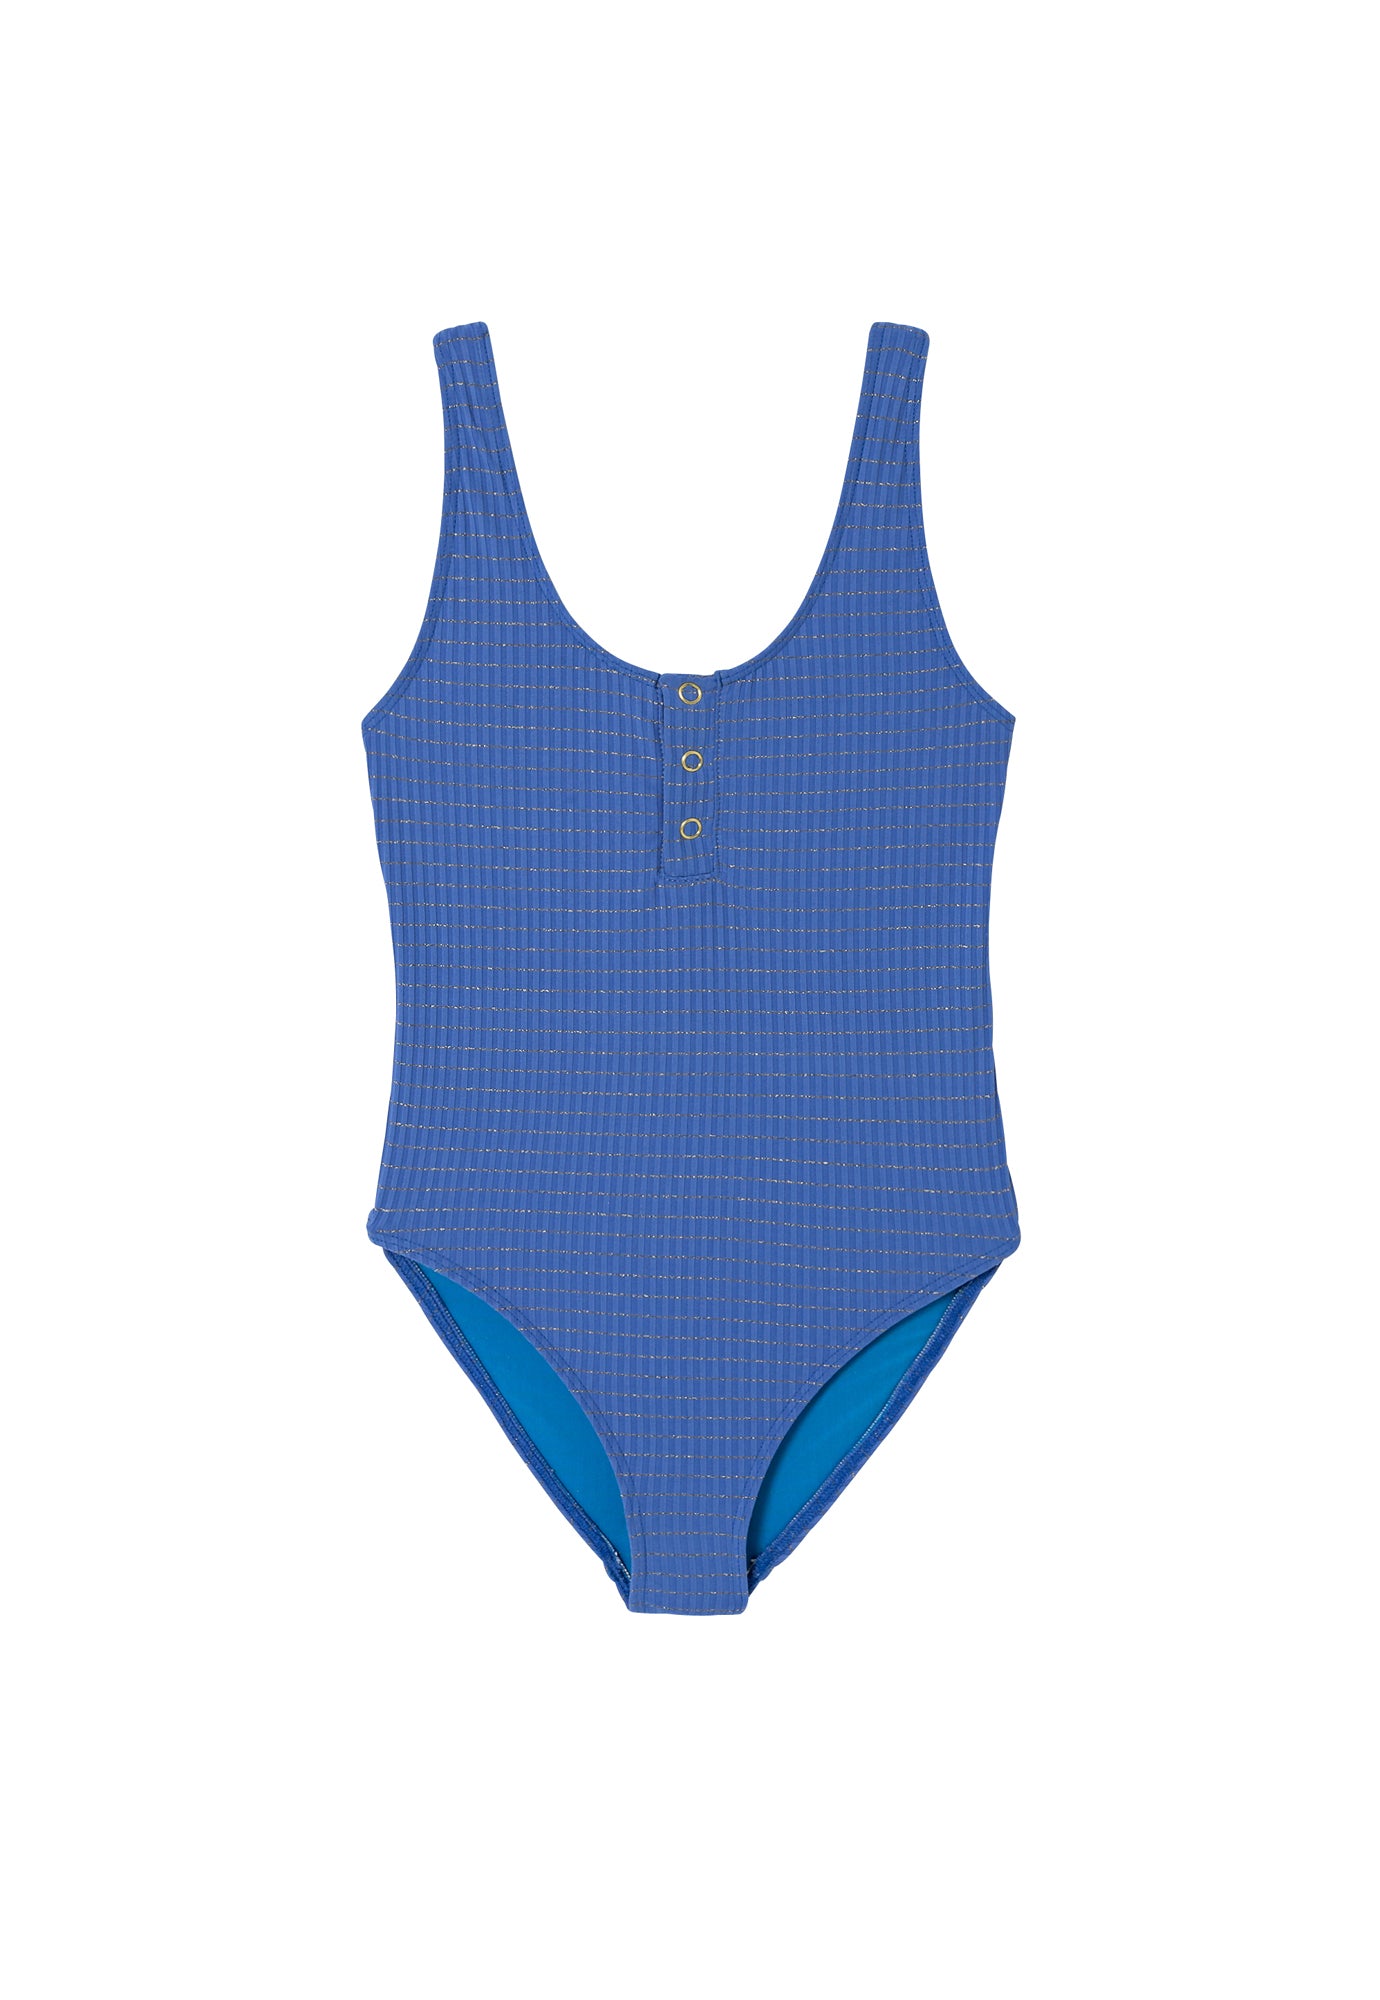 One-piece swimsuit, blue with gold stripes